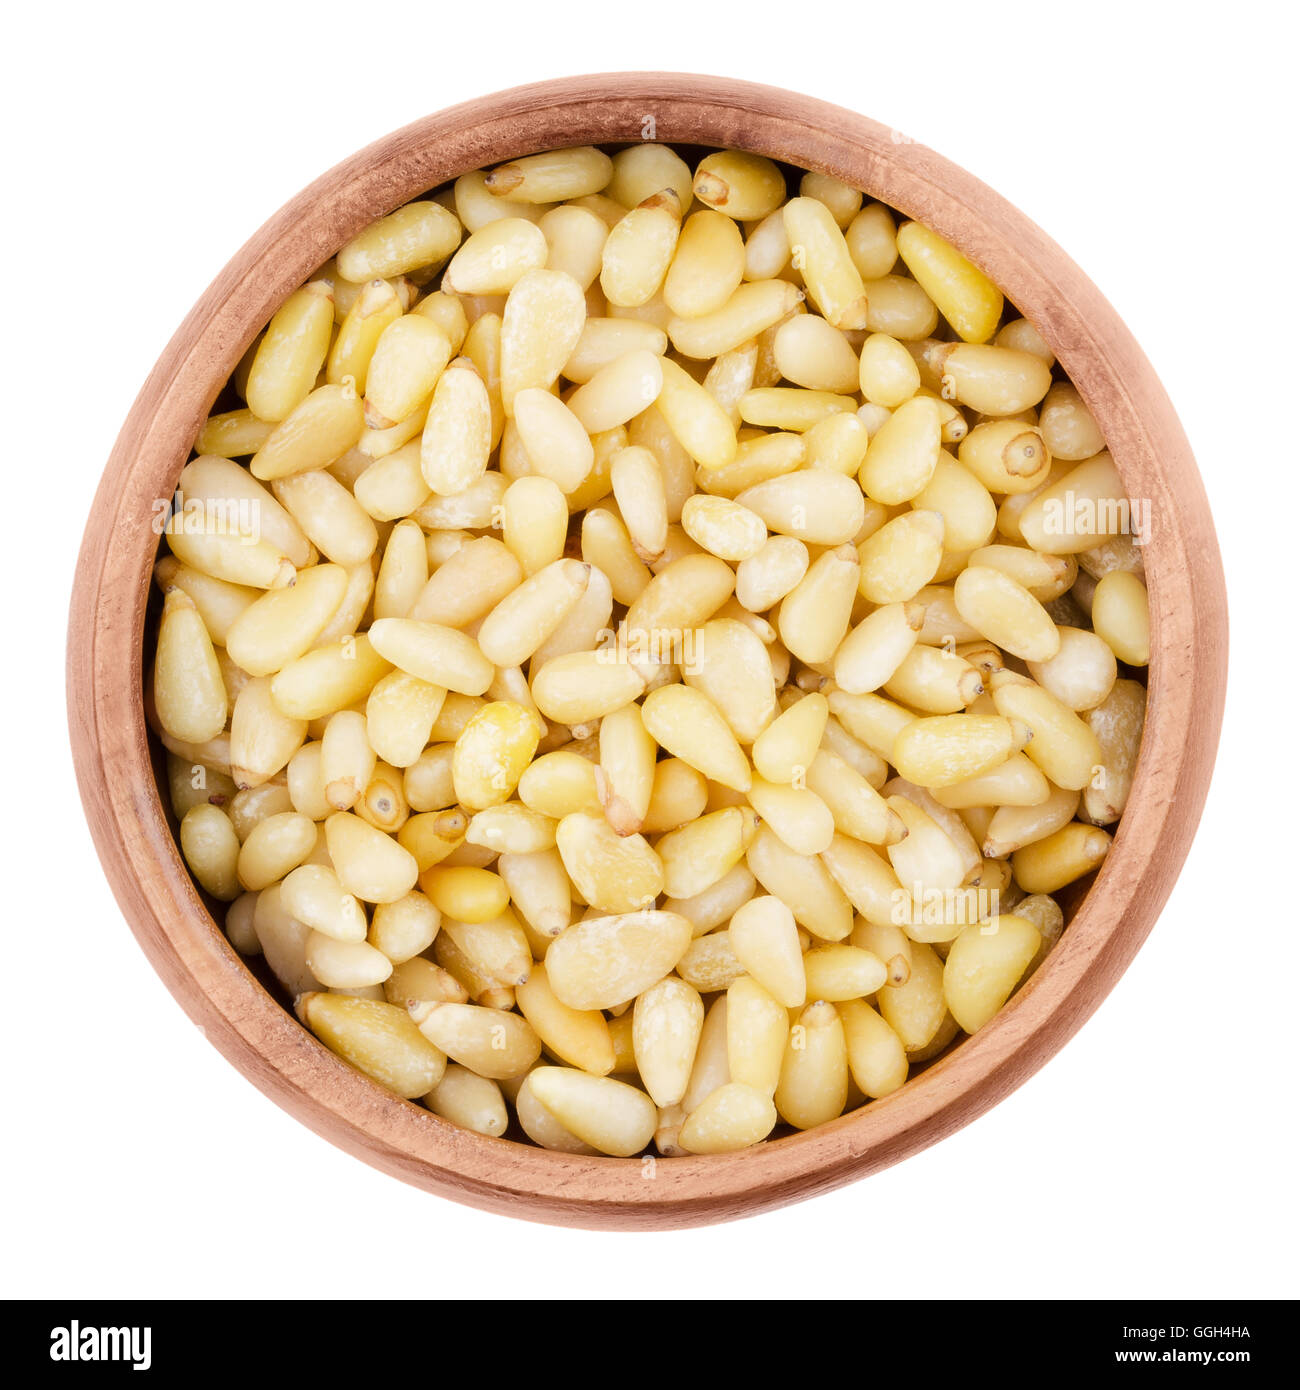 Shelled pine nuts in a bowl on white background. Edible seeds of Korean pines family Pinaceae, genus Pinus, in a wooden bowl. Stock Photo